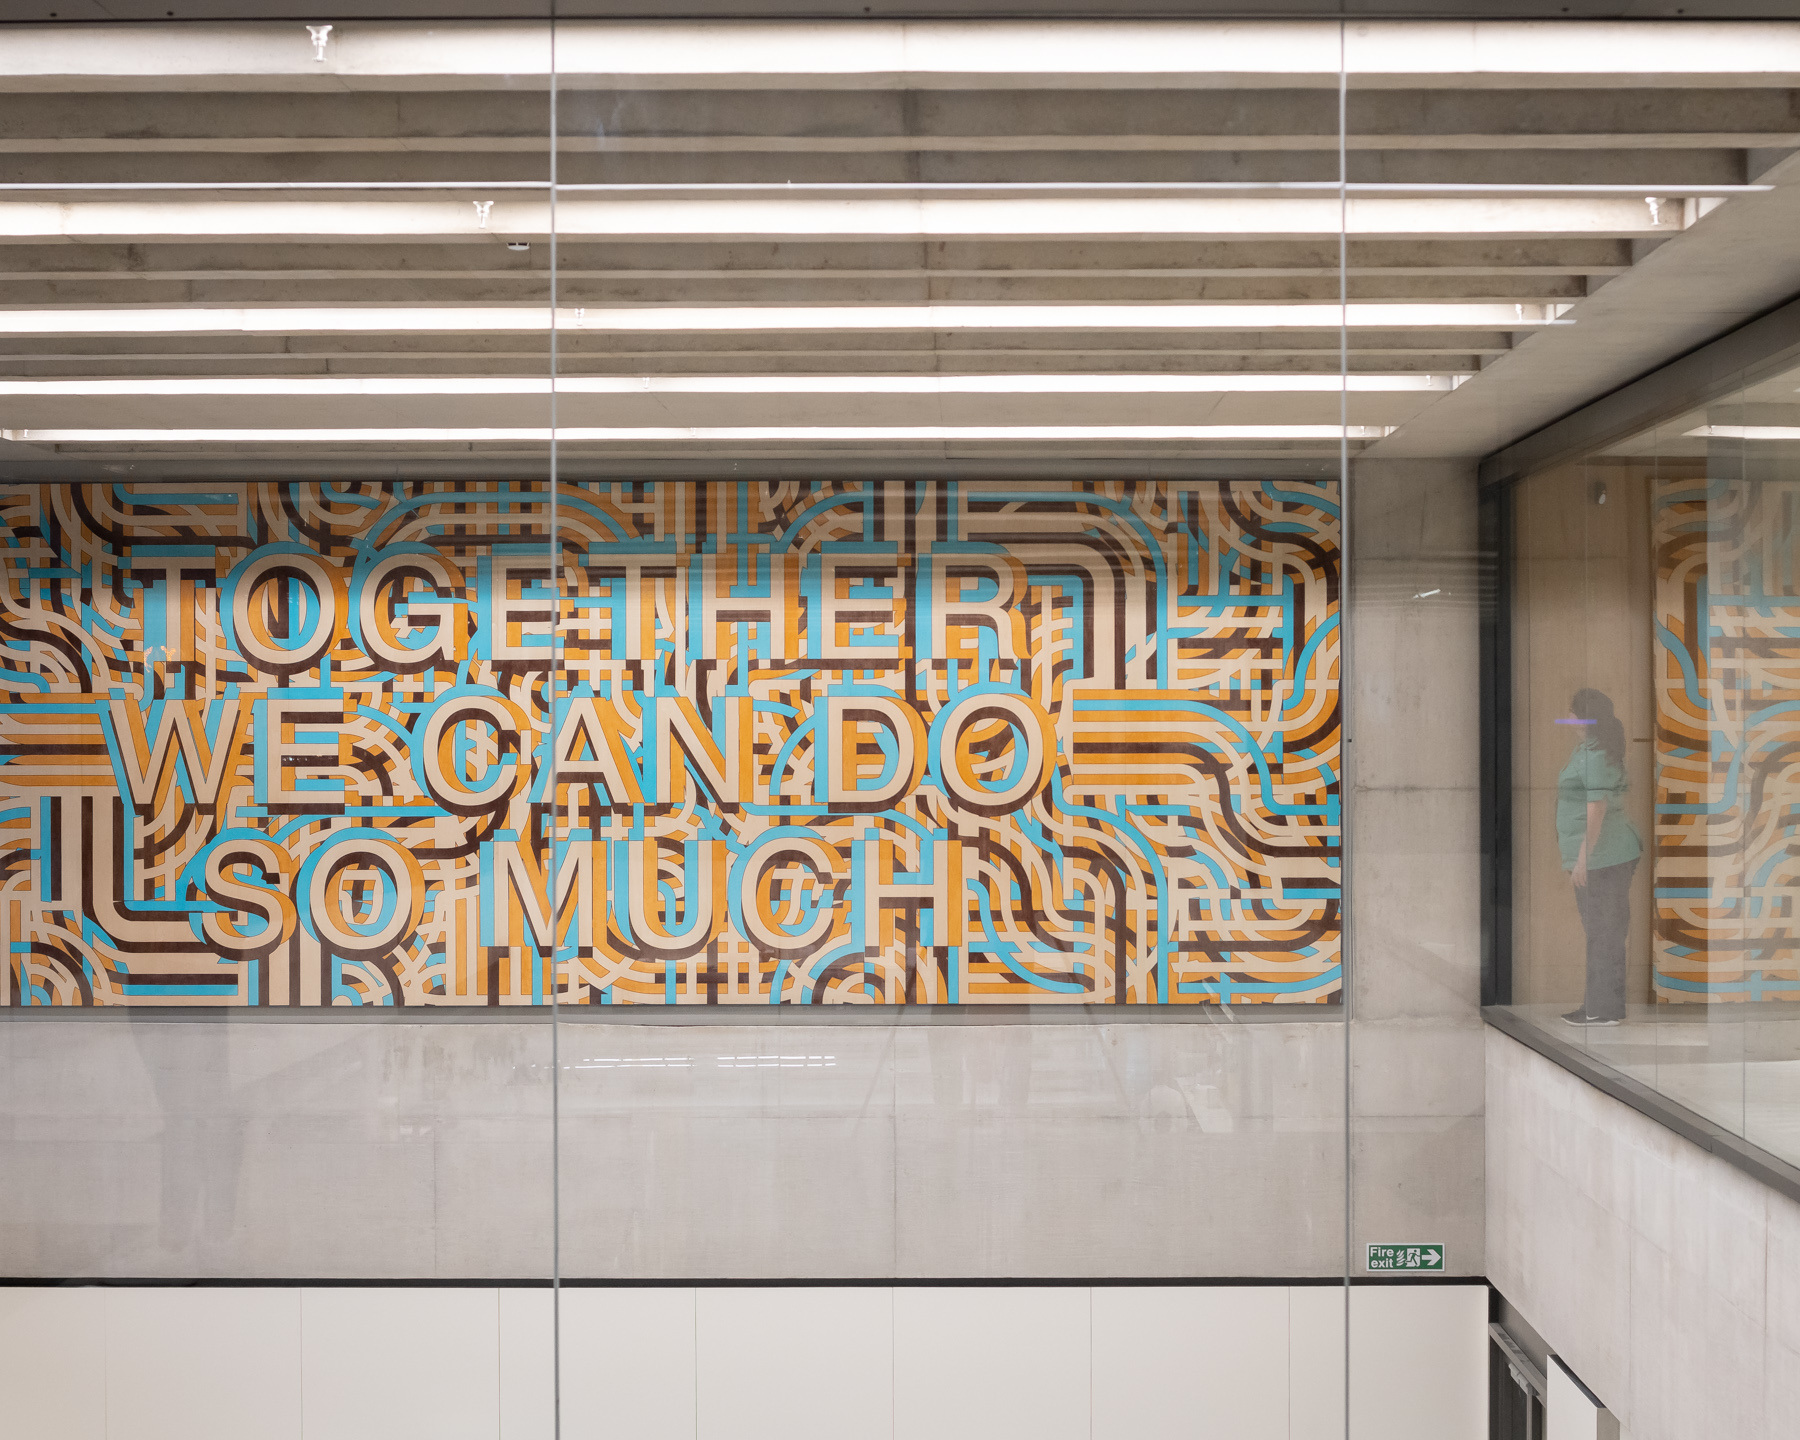 Together We Can Do So Much, Mark Titchner, 2019. Photo credit: Jim Stephenson